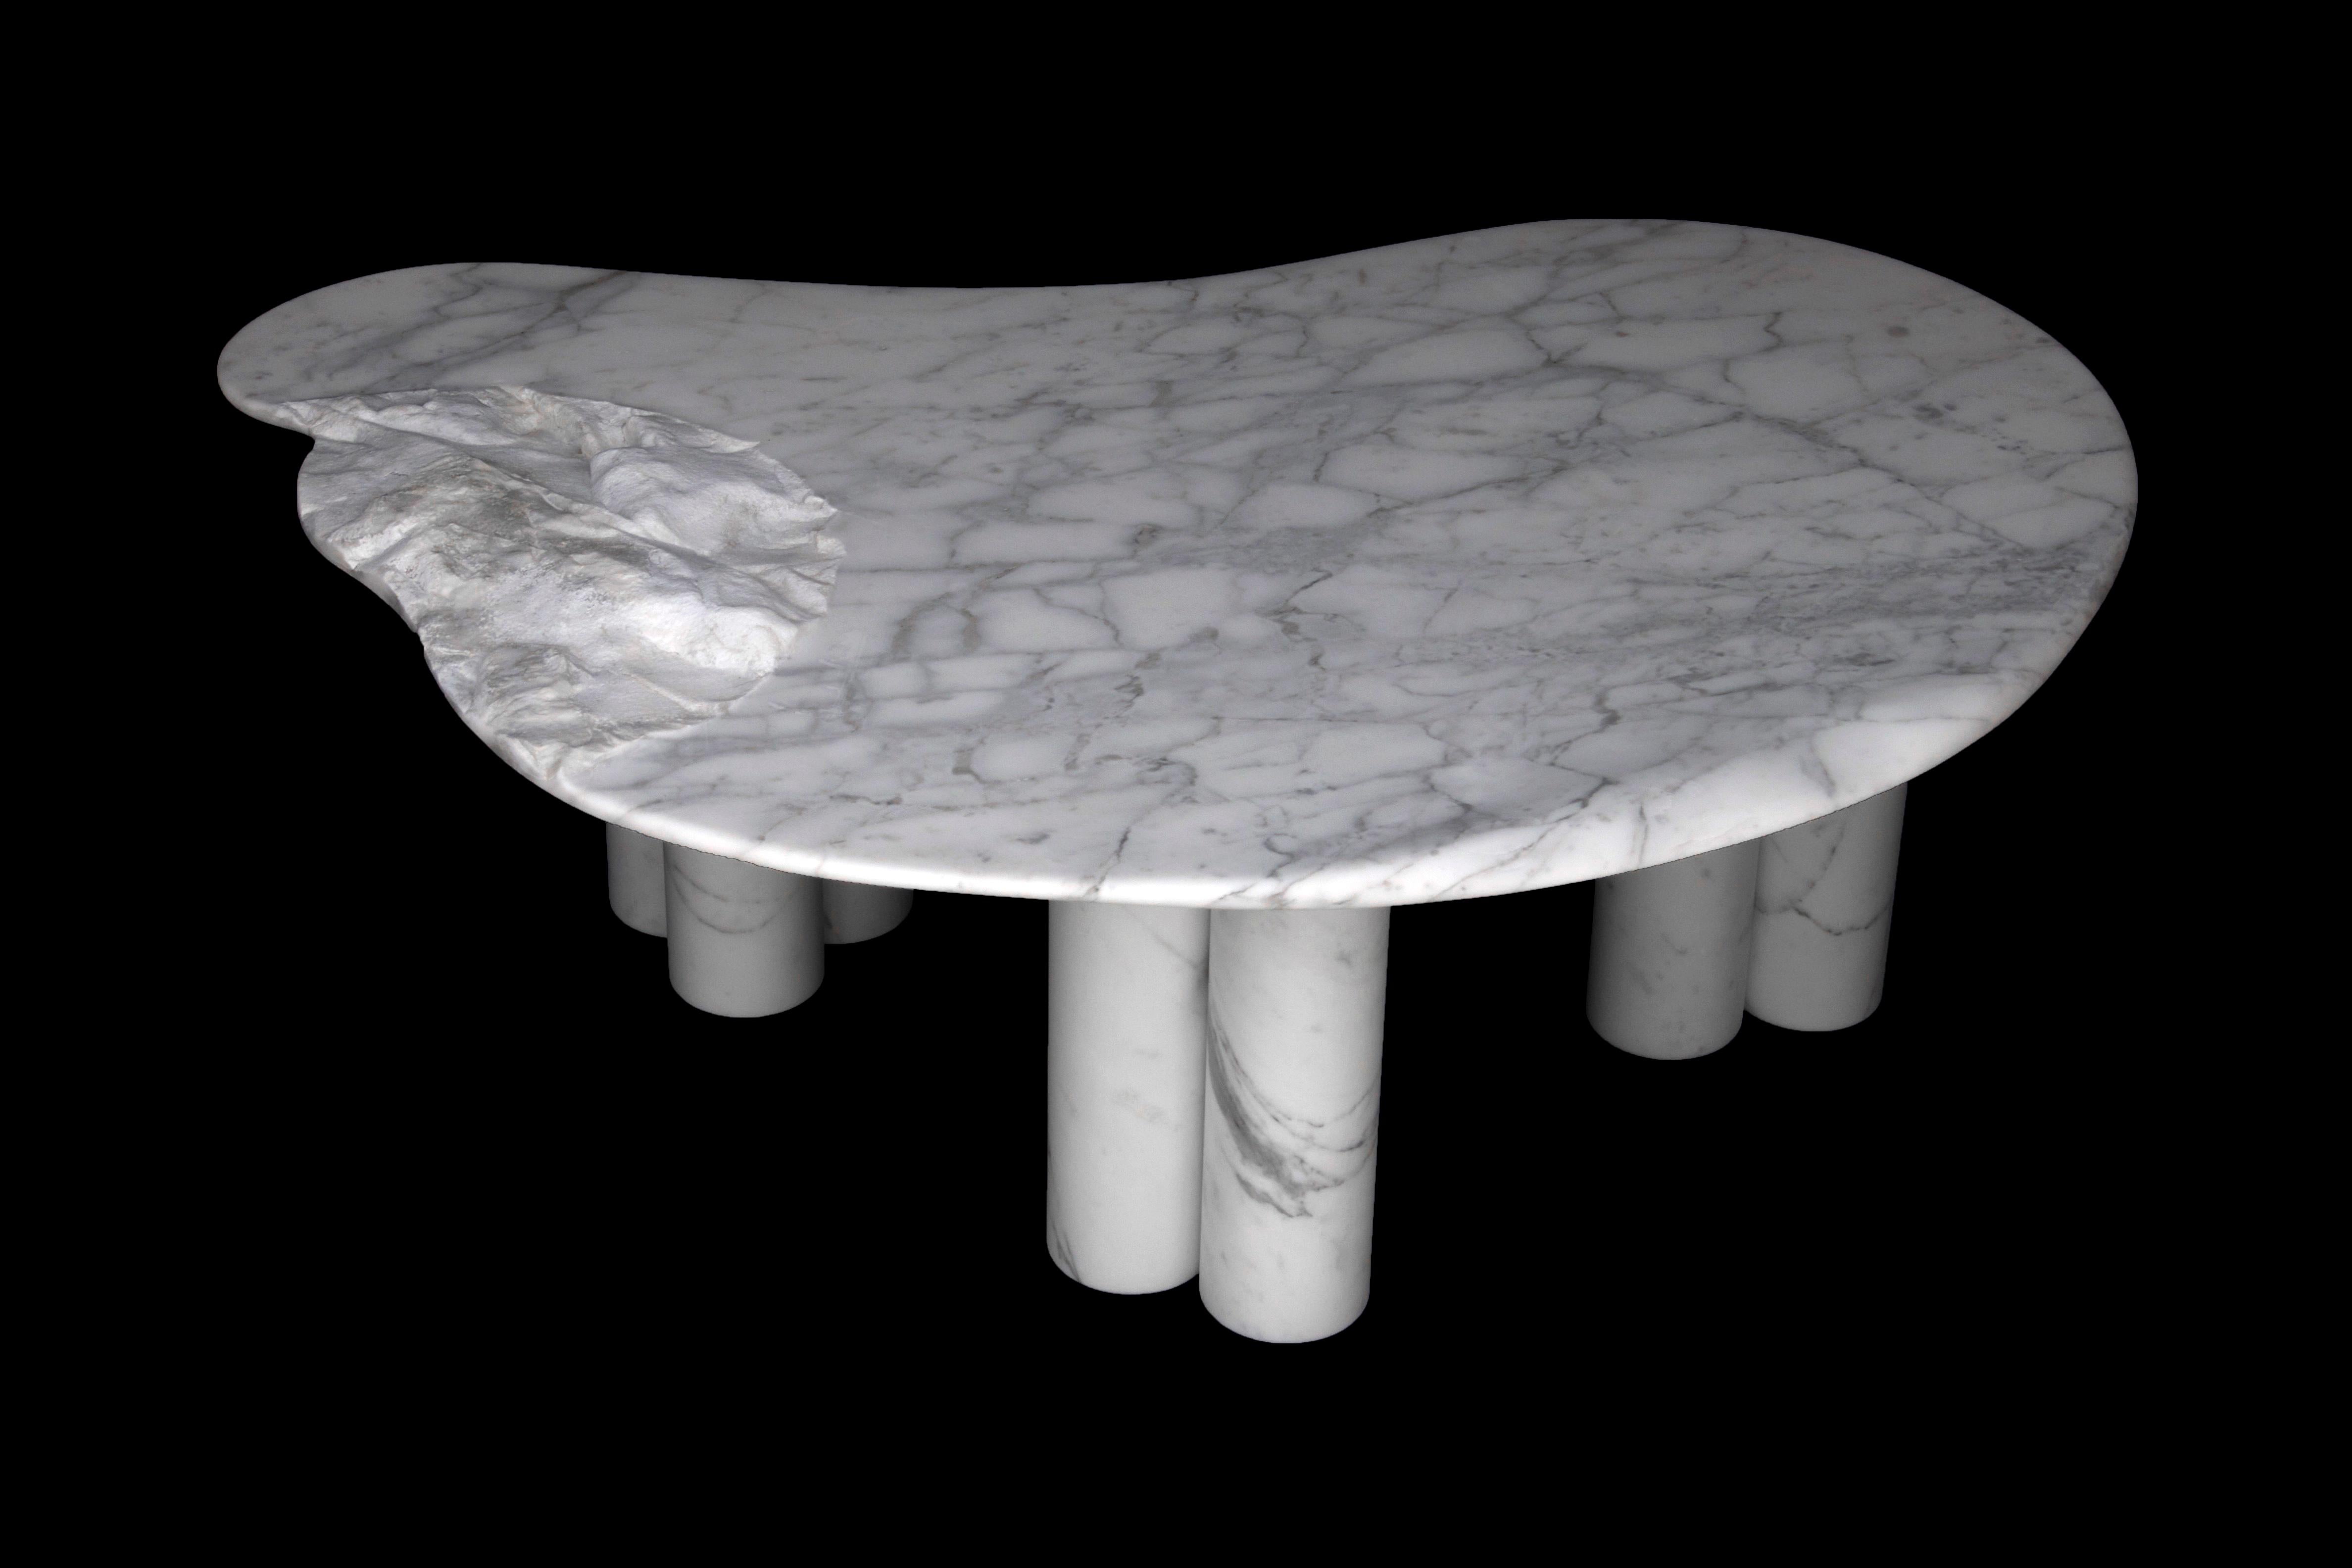 Fidji coffee table by Jean-Fréderic Bourdier
Dimensions: D 110 x W 74 x H 43 cm
Materials: Arabescato & Statuario marble.

Mostly guided by his sculptor skills JFB and his life time strong attraction for nature, has started out this collection